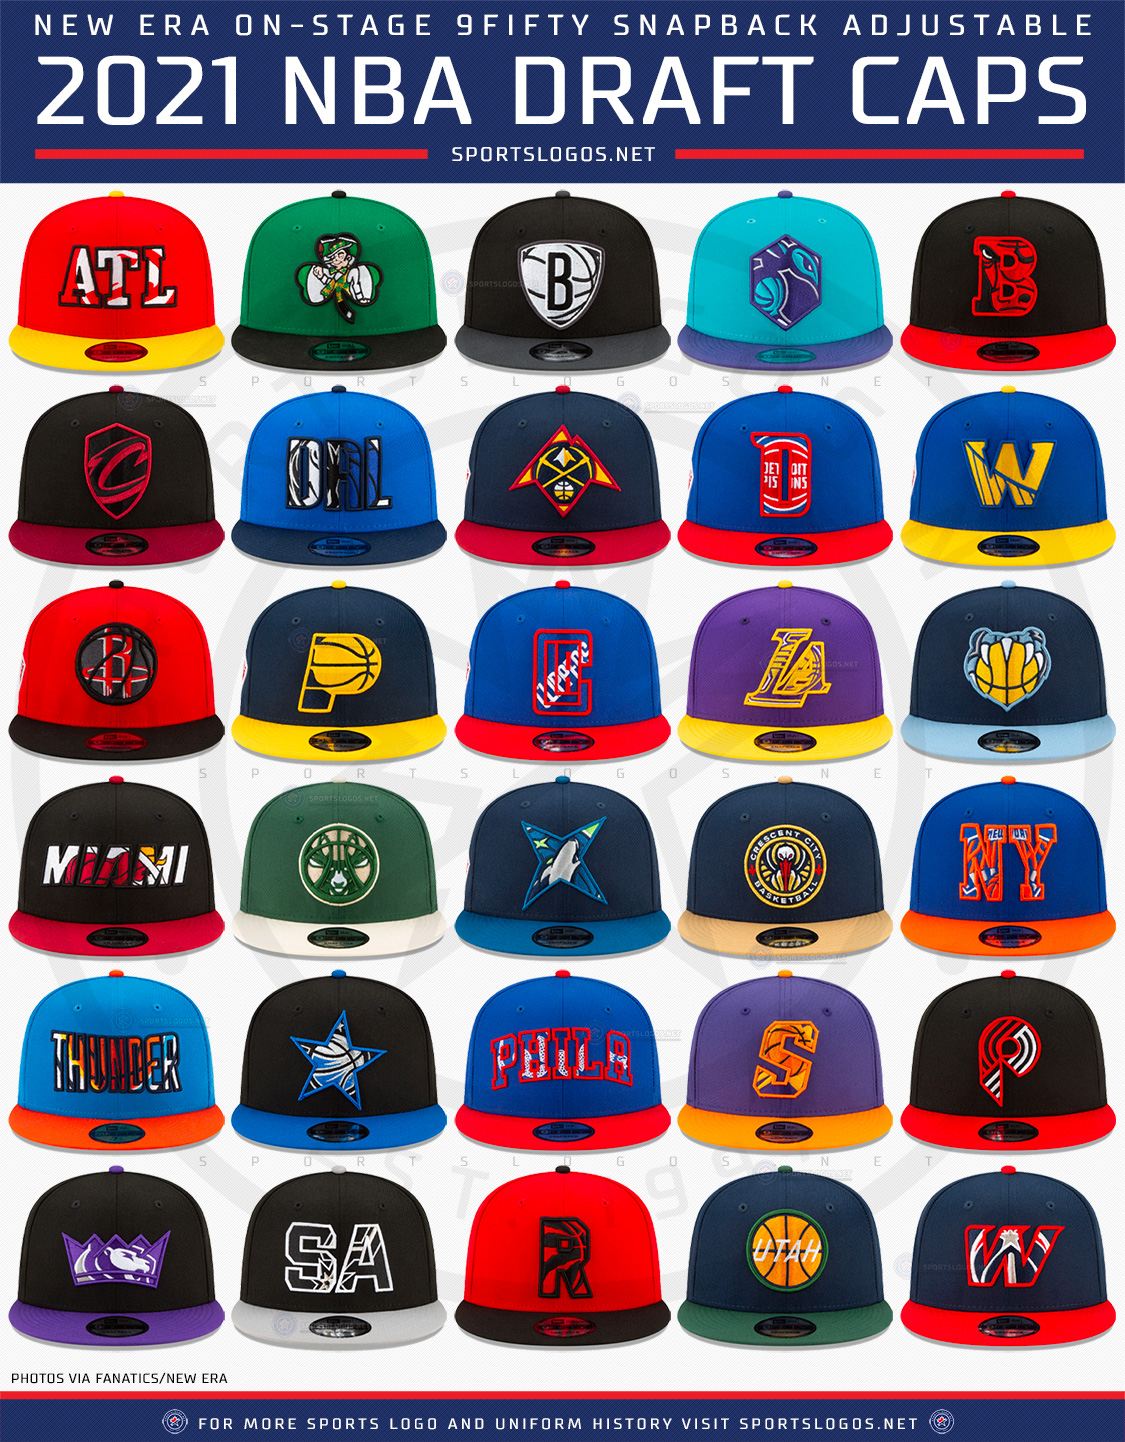 The 2021 NBA Draft “On-Stage” Cap Collection – SportsLogos.Net News